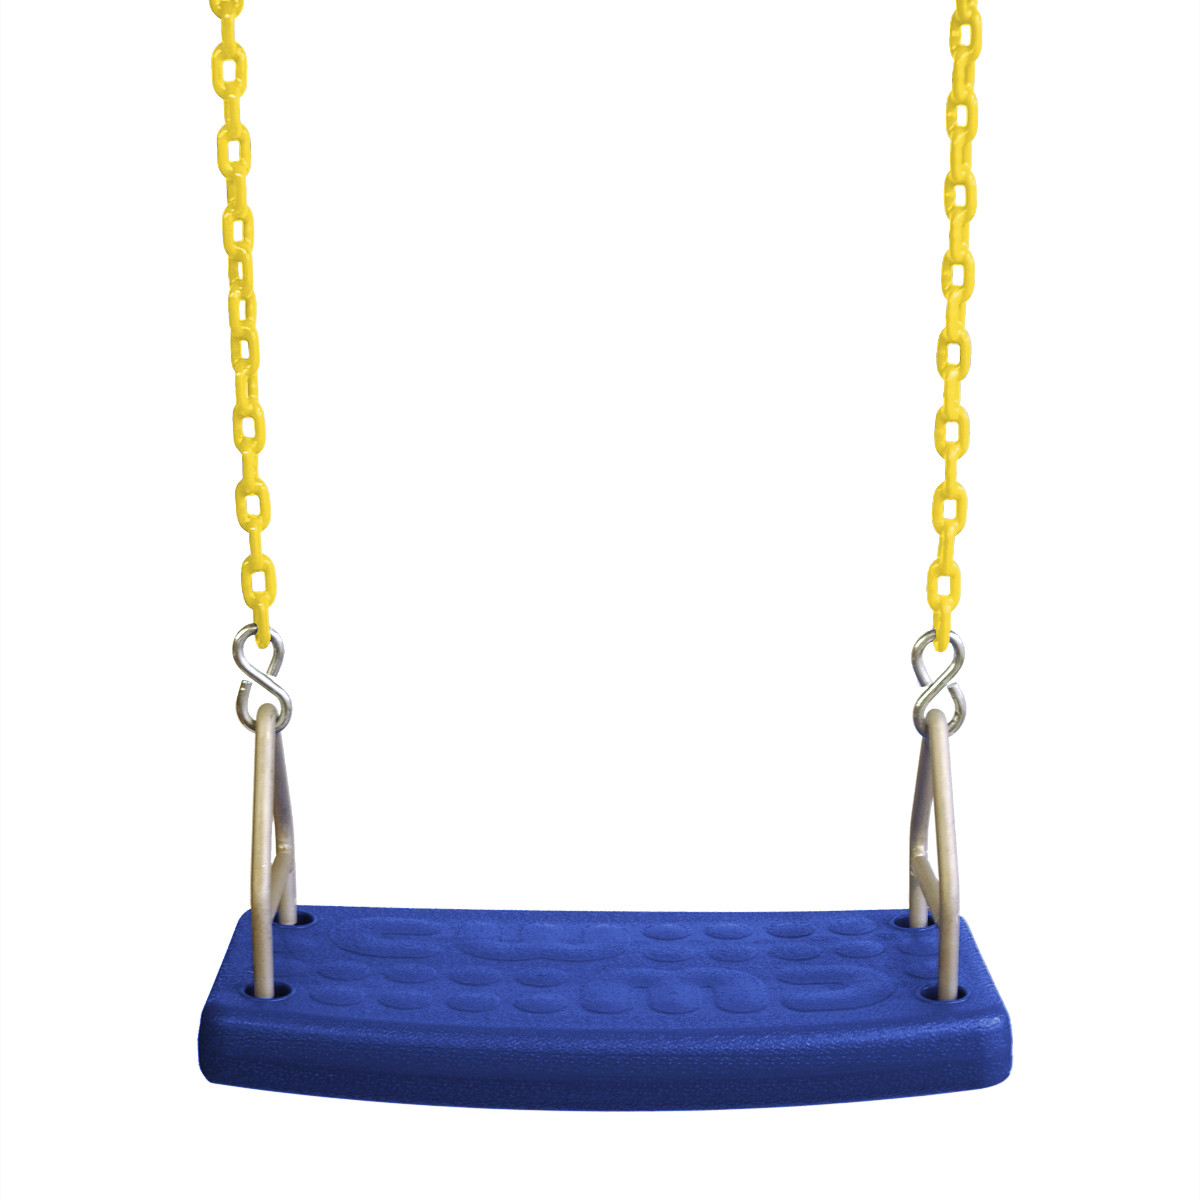 Molded Flat Swing Seat with Fully Coated Chain